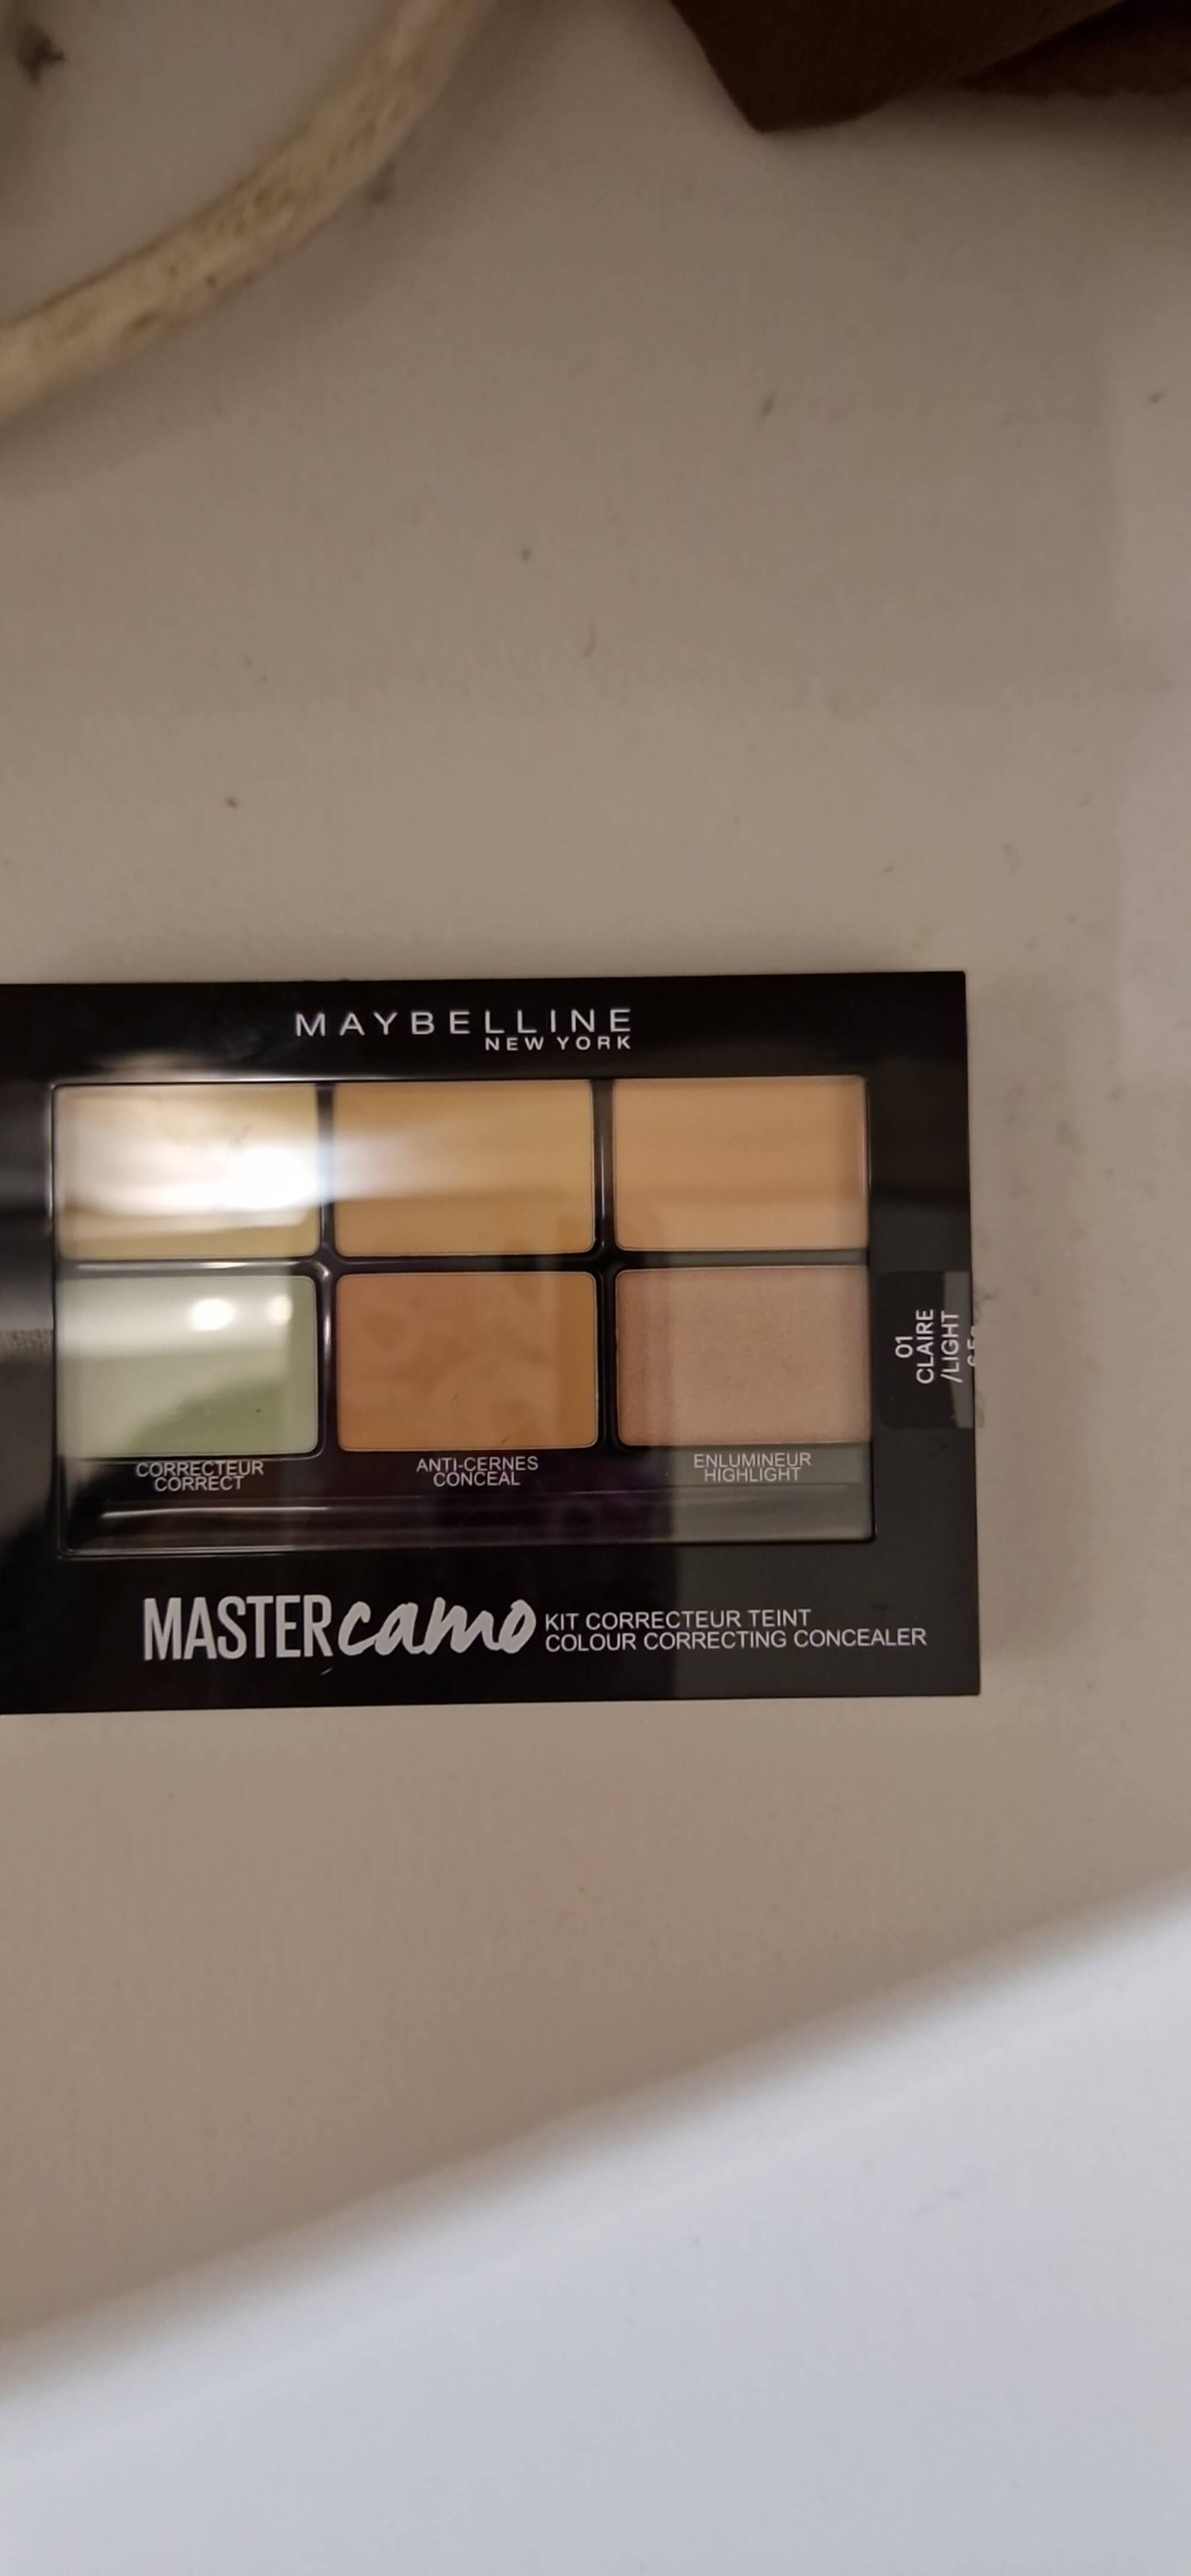 MAYBELLINE NEW YORK - Colour correcting concealer 01 claire